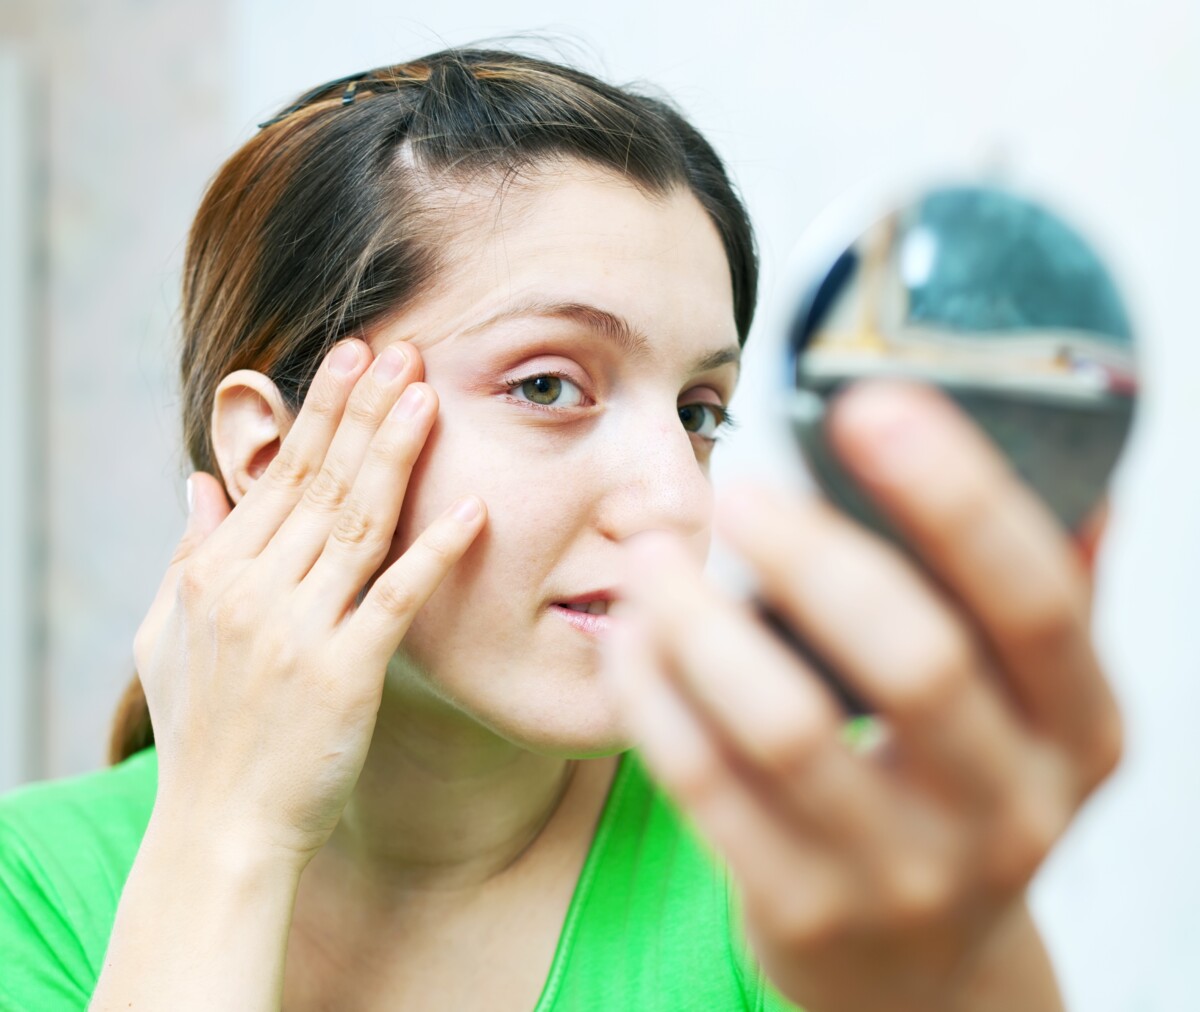 Eyebrow Bald Spots Causes And Solutions Scary Symptoms 